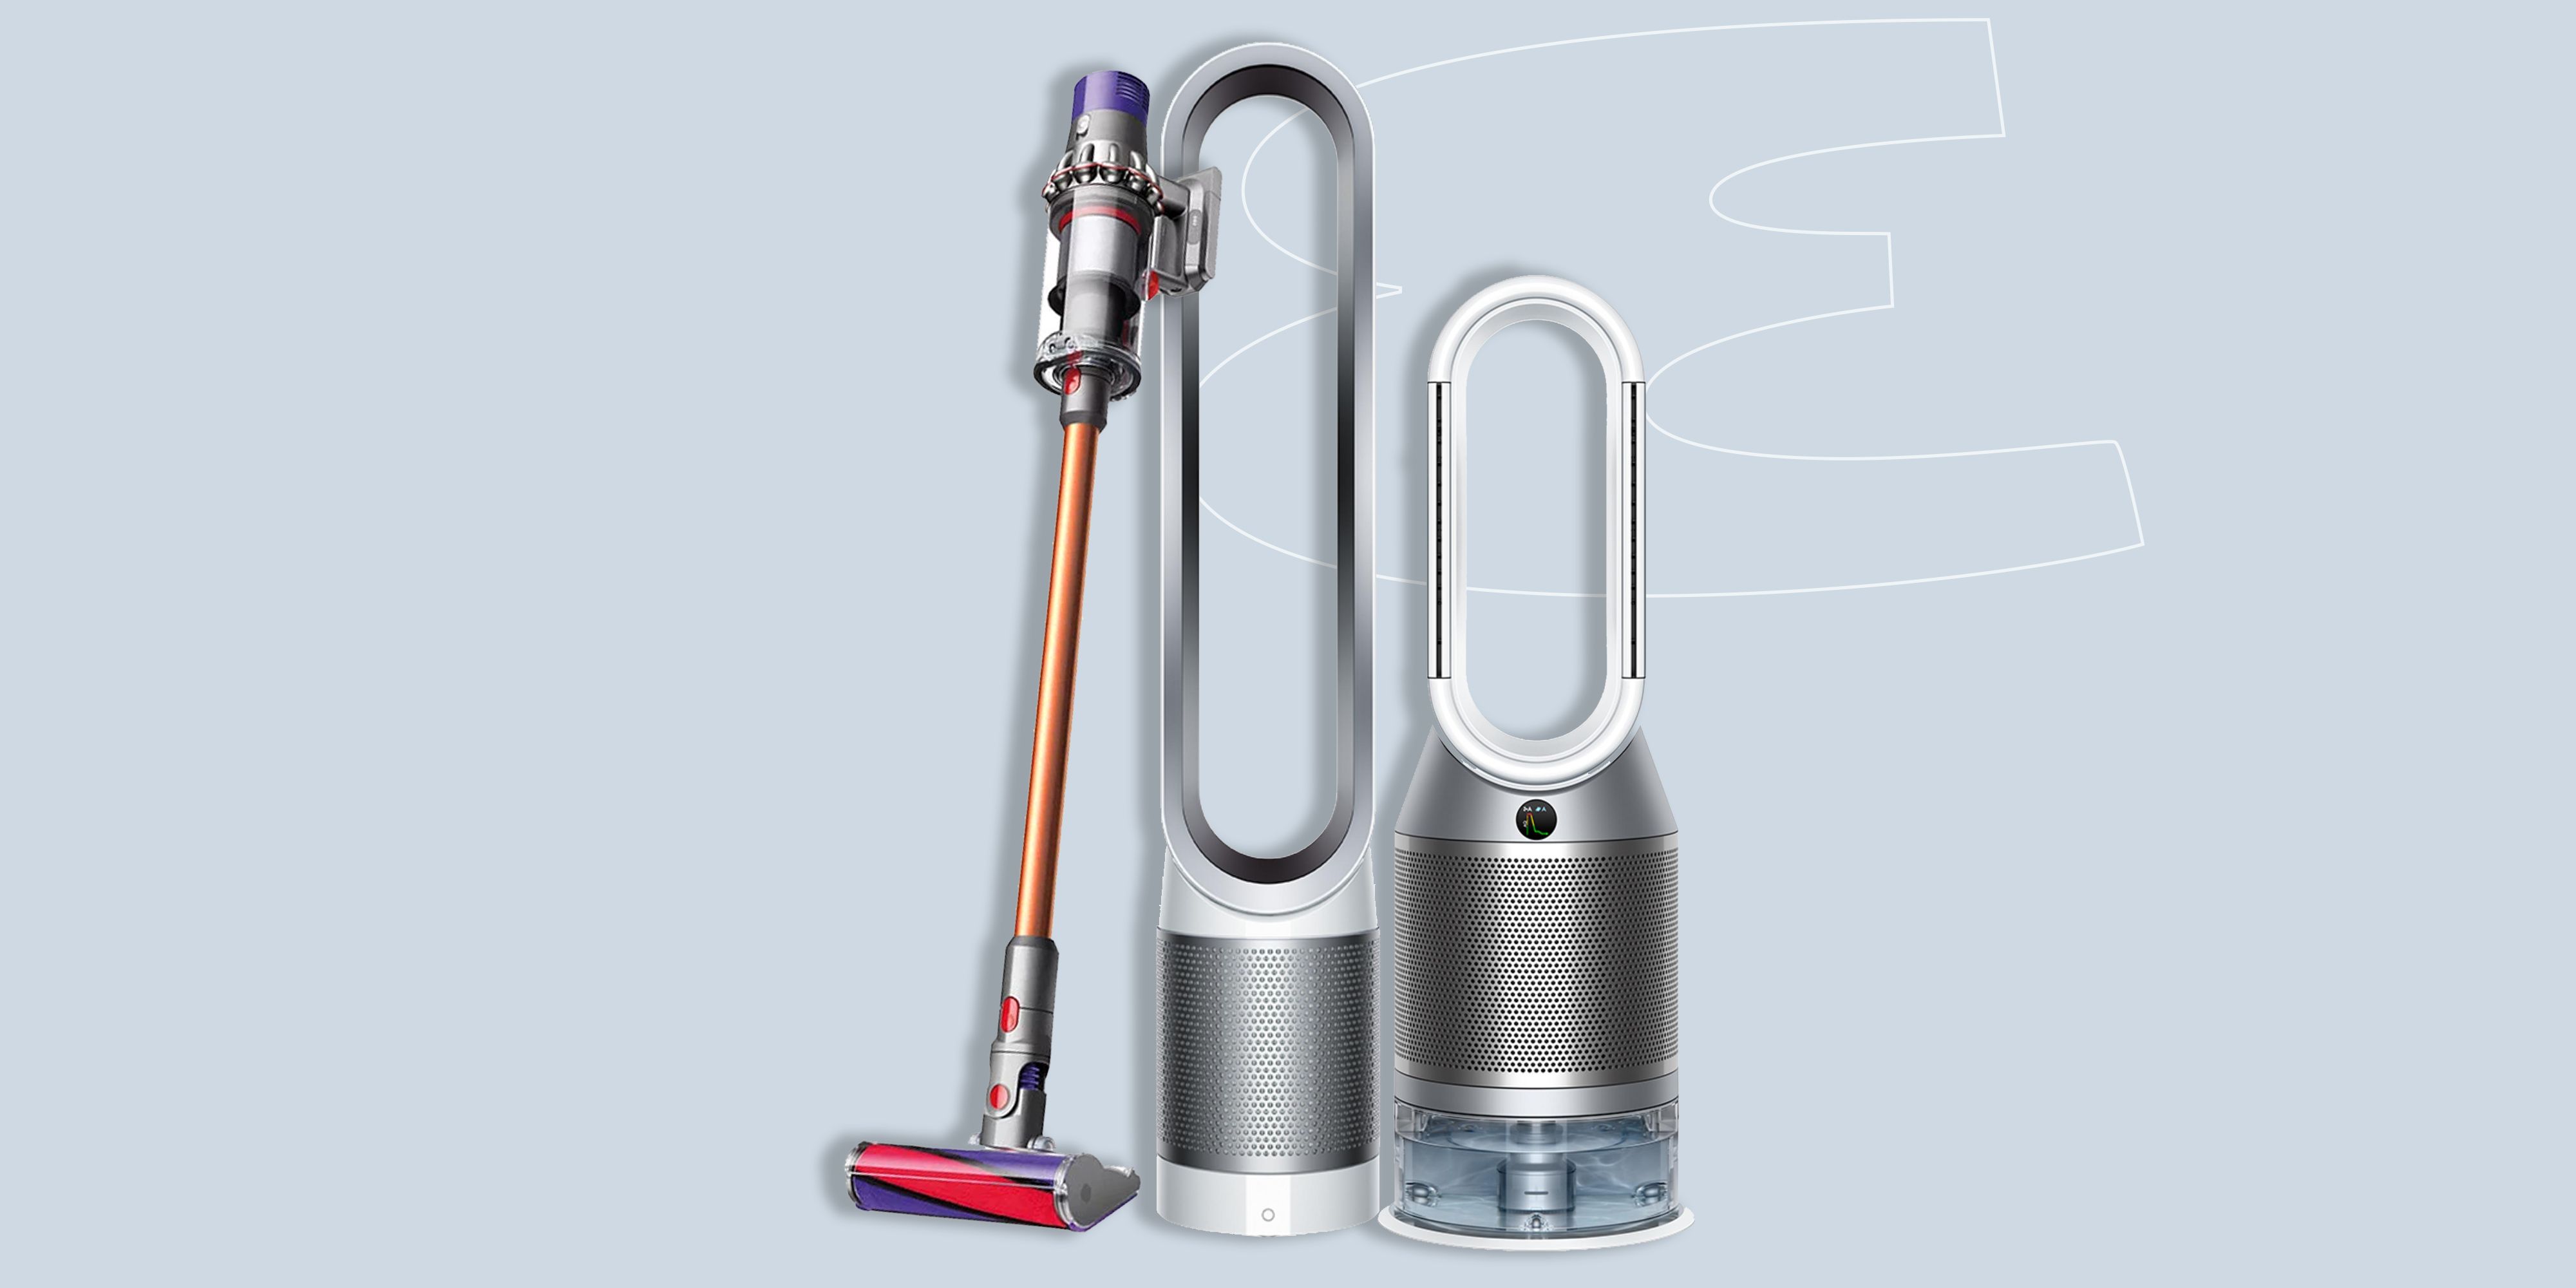 The mighty Dyson Cyclone is on sale